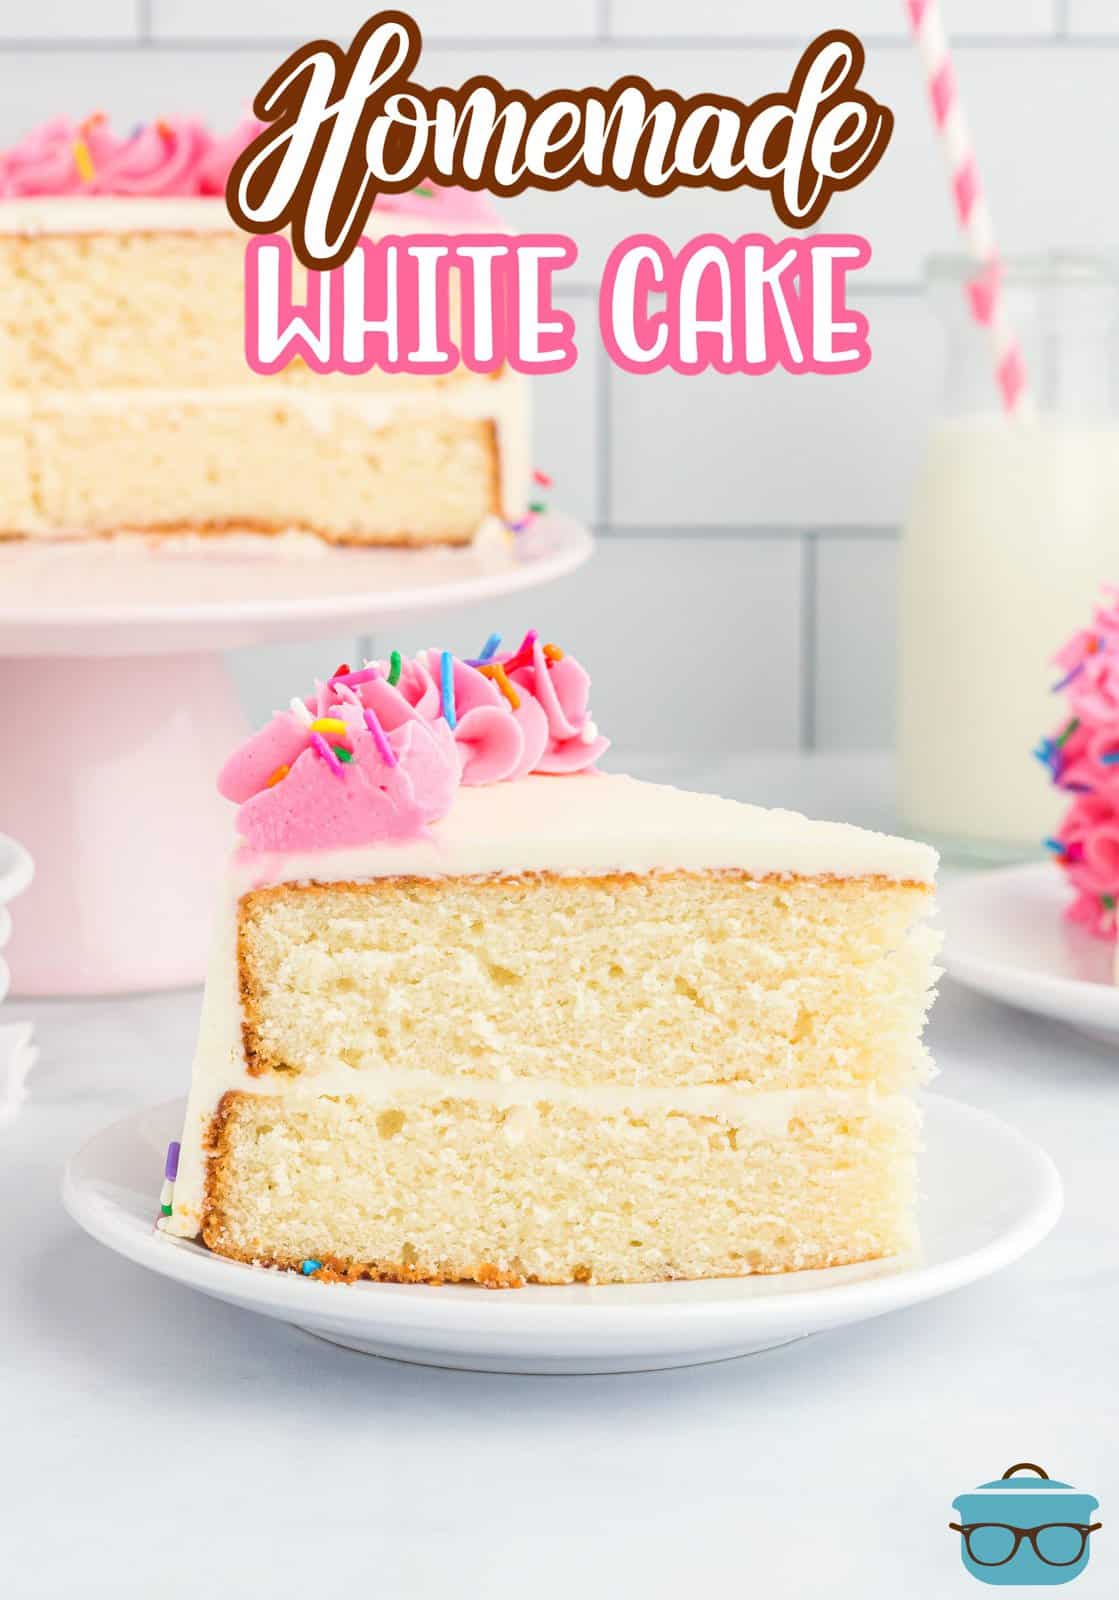 A slice of layered white cake with frosting.